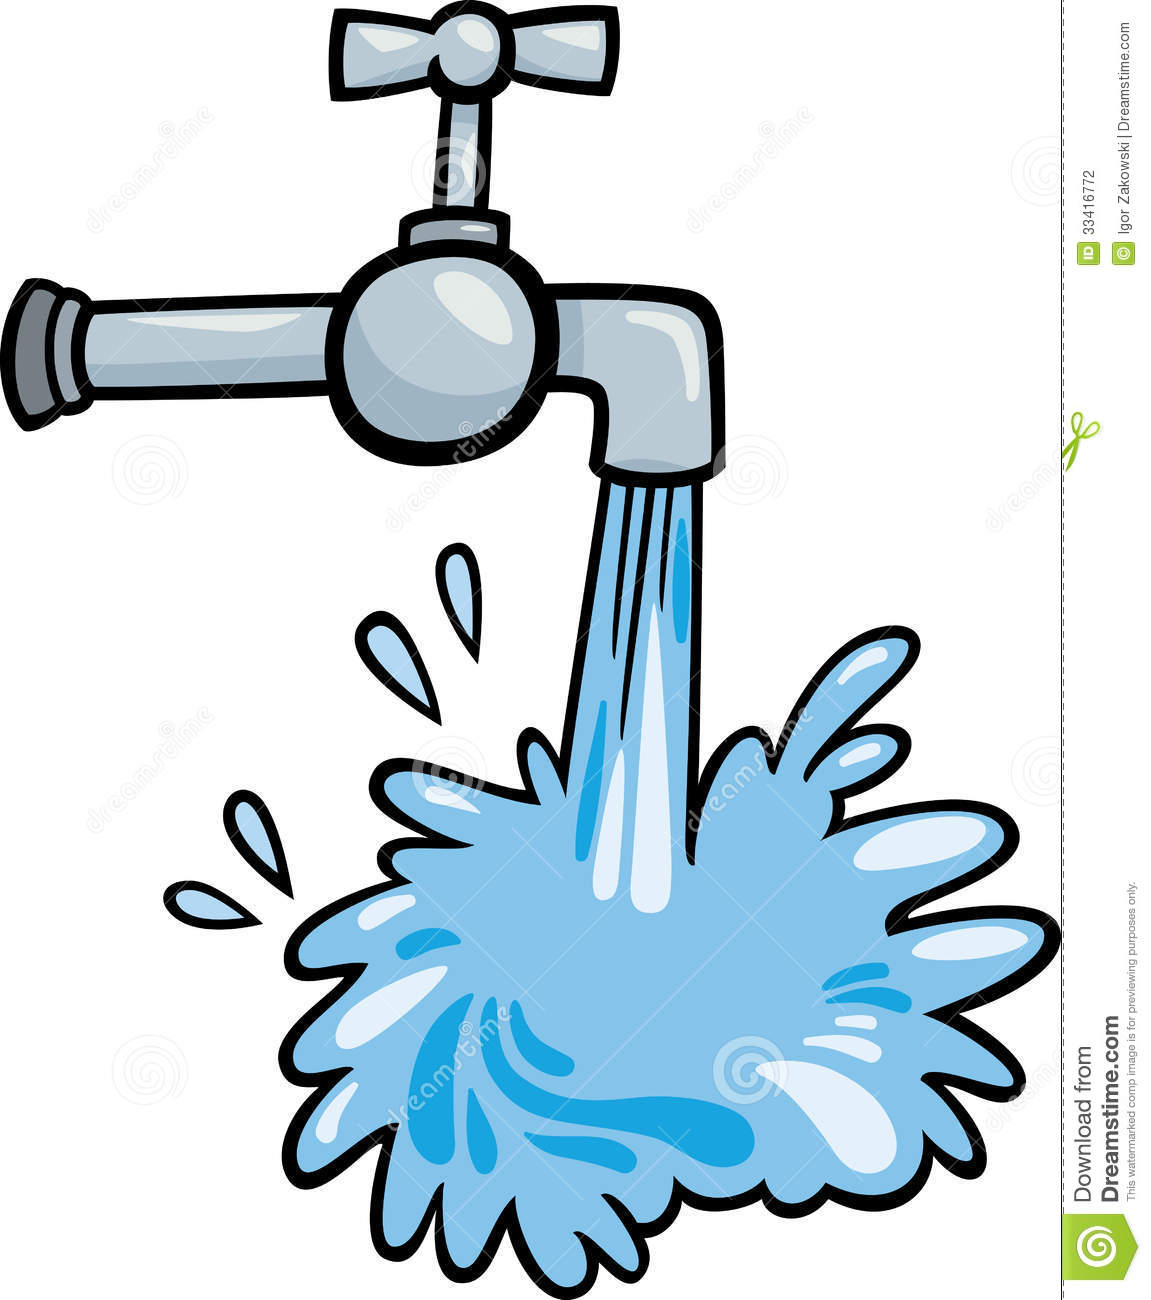 Water Faucet Clipart Black And White